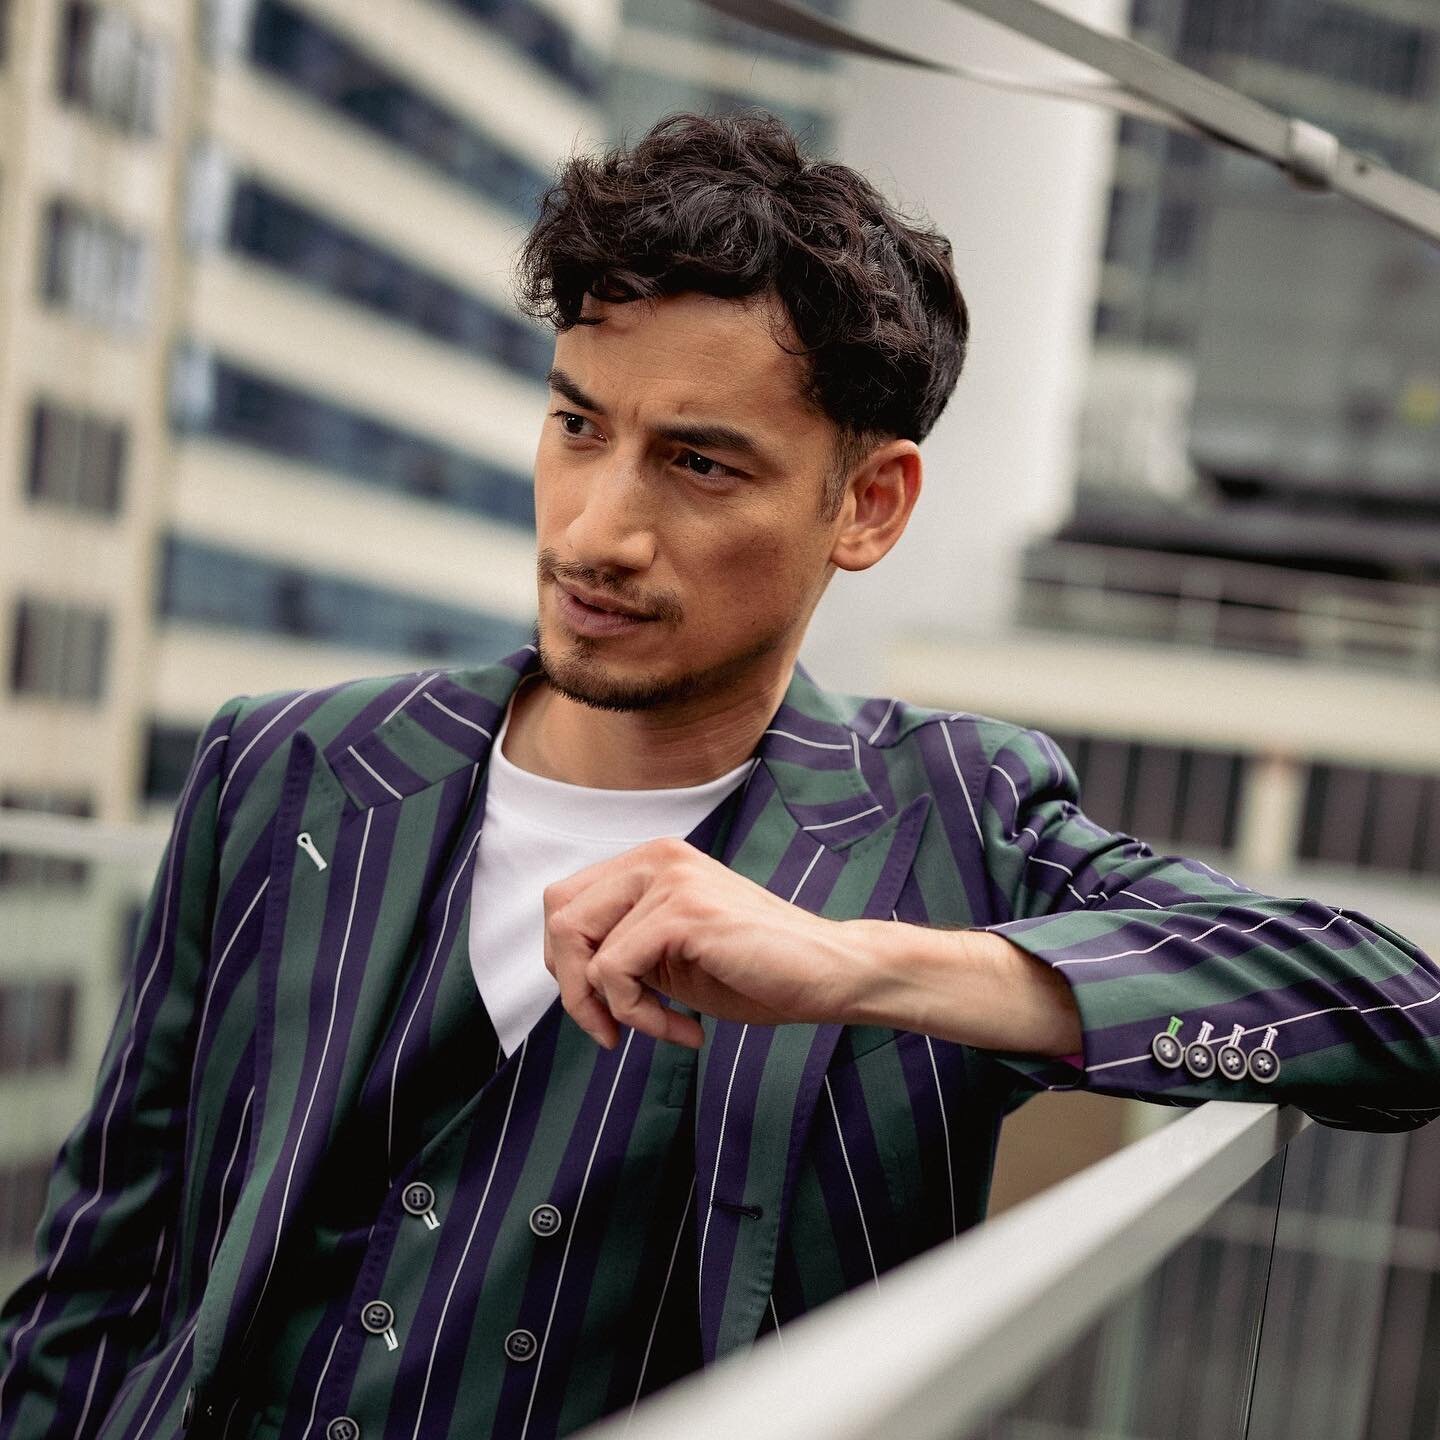 #tiffday4 with the ever stylish Carlos Bustamante @losbot 📷 captured with the stunning views at the @shangrilato 
&bull;
Stylist @mariachowdhery 
&bull;
copyright notice:
&copy;Corus Television Limited Partnership, 2010-2023. All Rights Reserved. #t